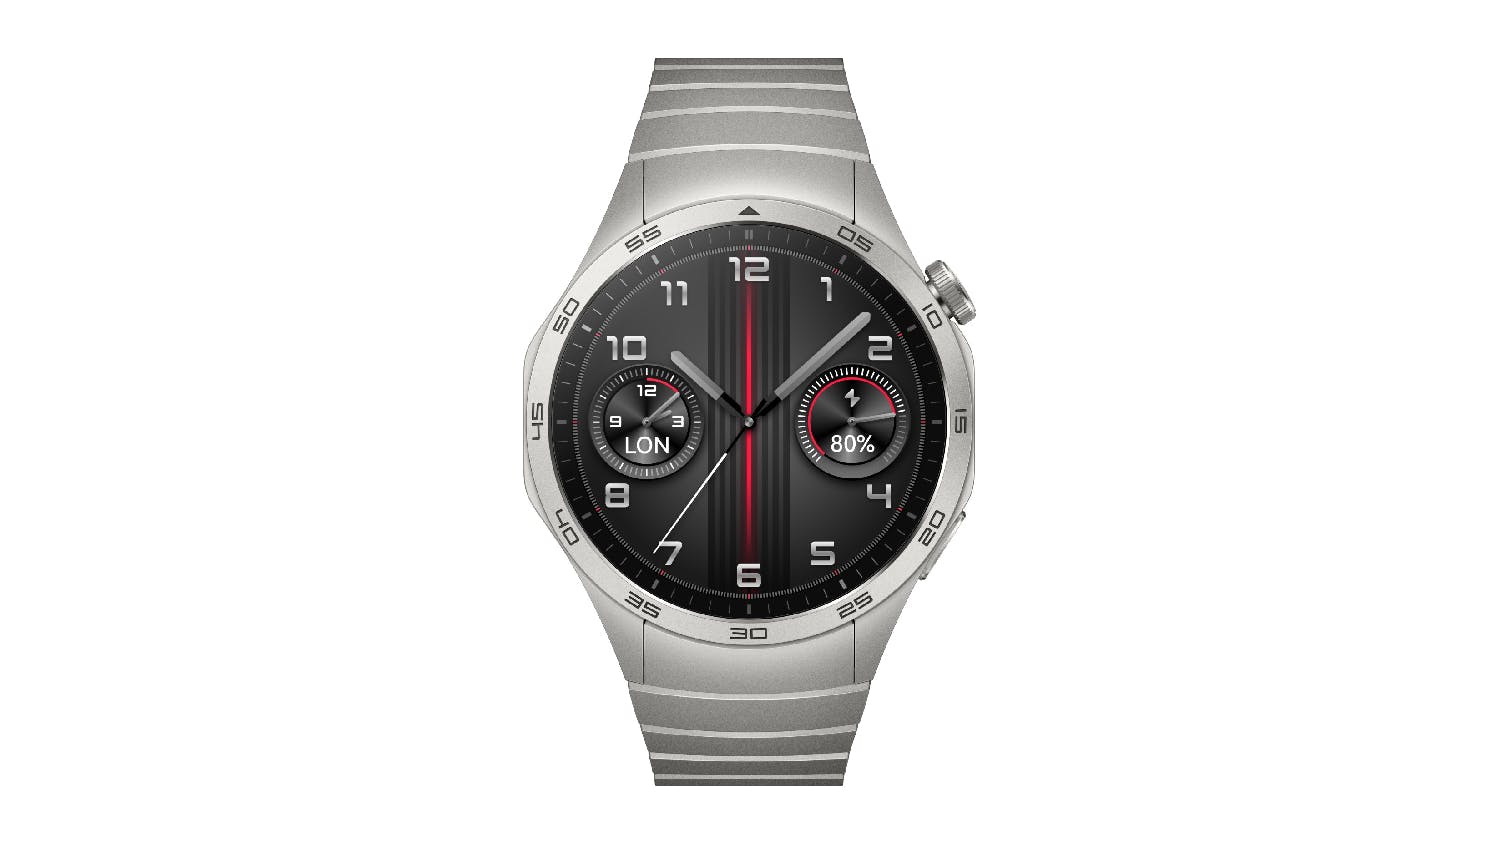 Huawei GT 4 Smartwatch - Stainless Steel Case with Stainless Steel Band (46mm, Bluetooth, Vital Tracking)